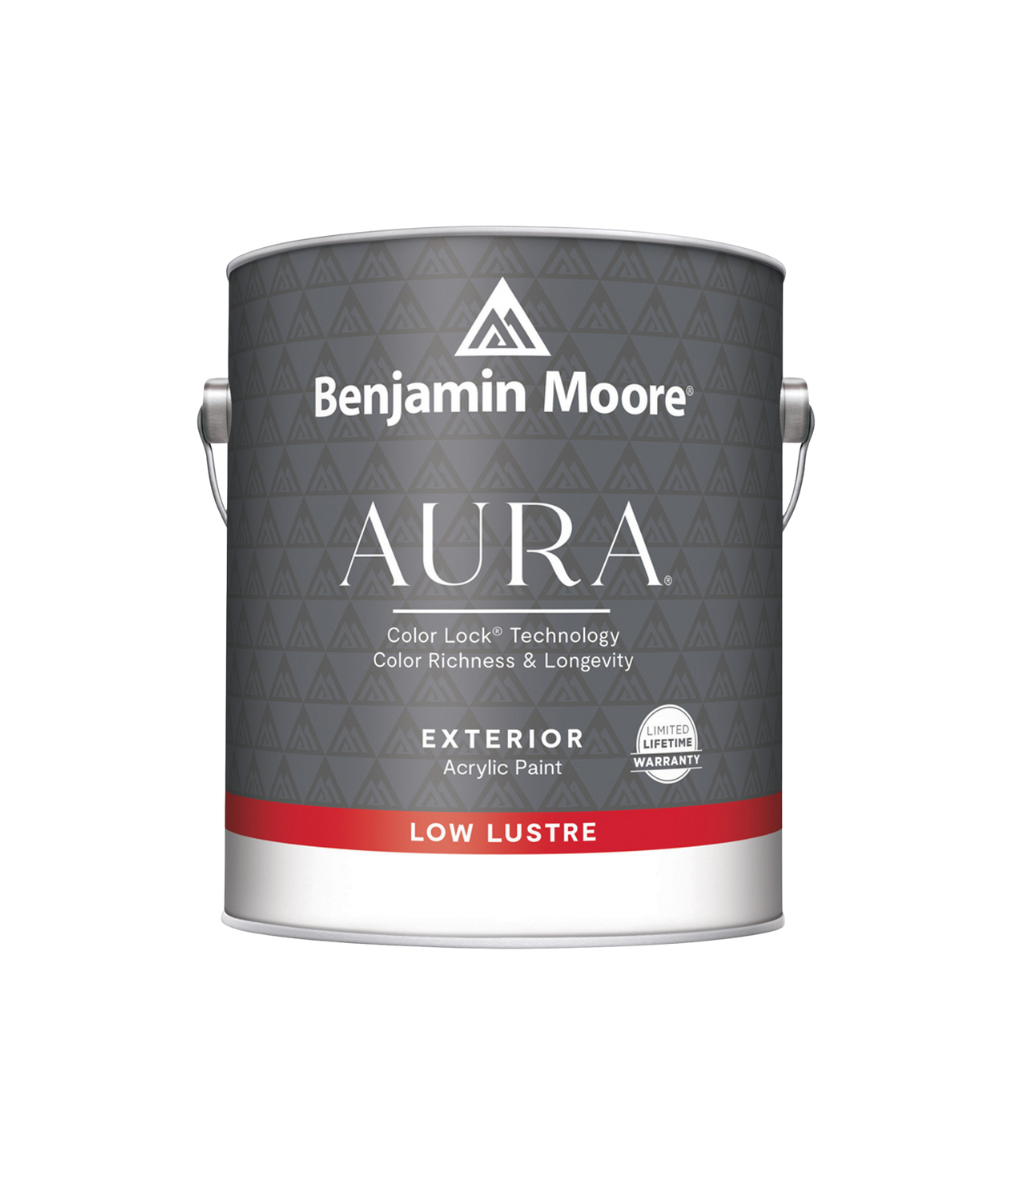 Benjamin Moore Aura Exterior Low Lustre Paint available at JC Licht.